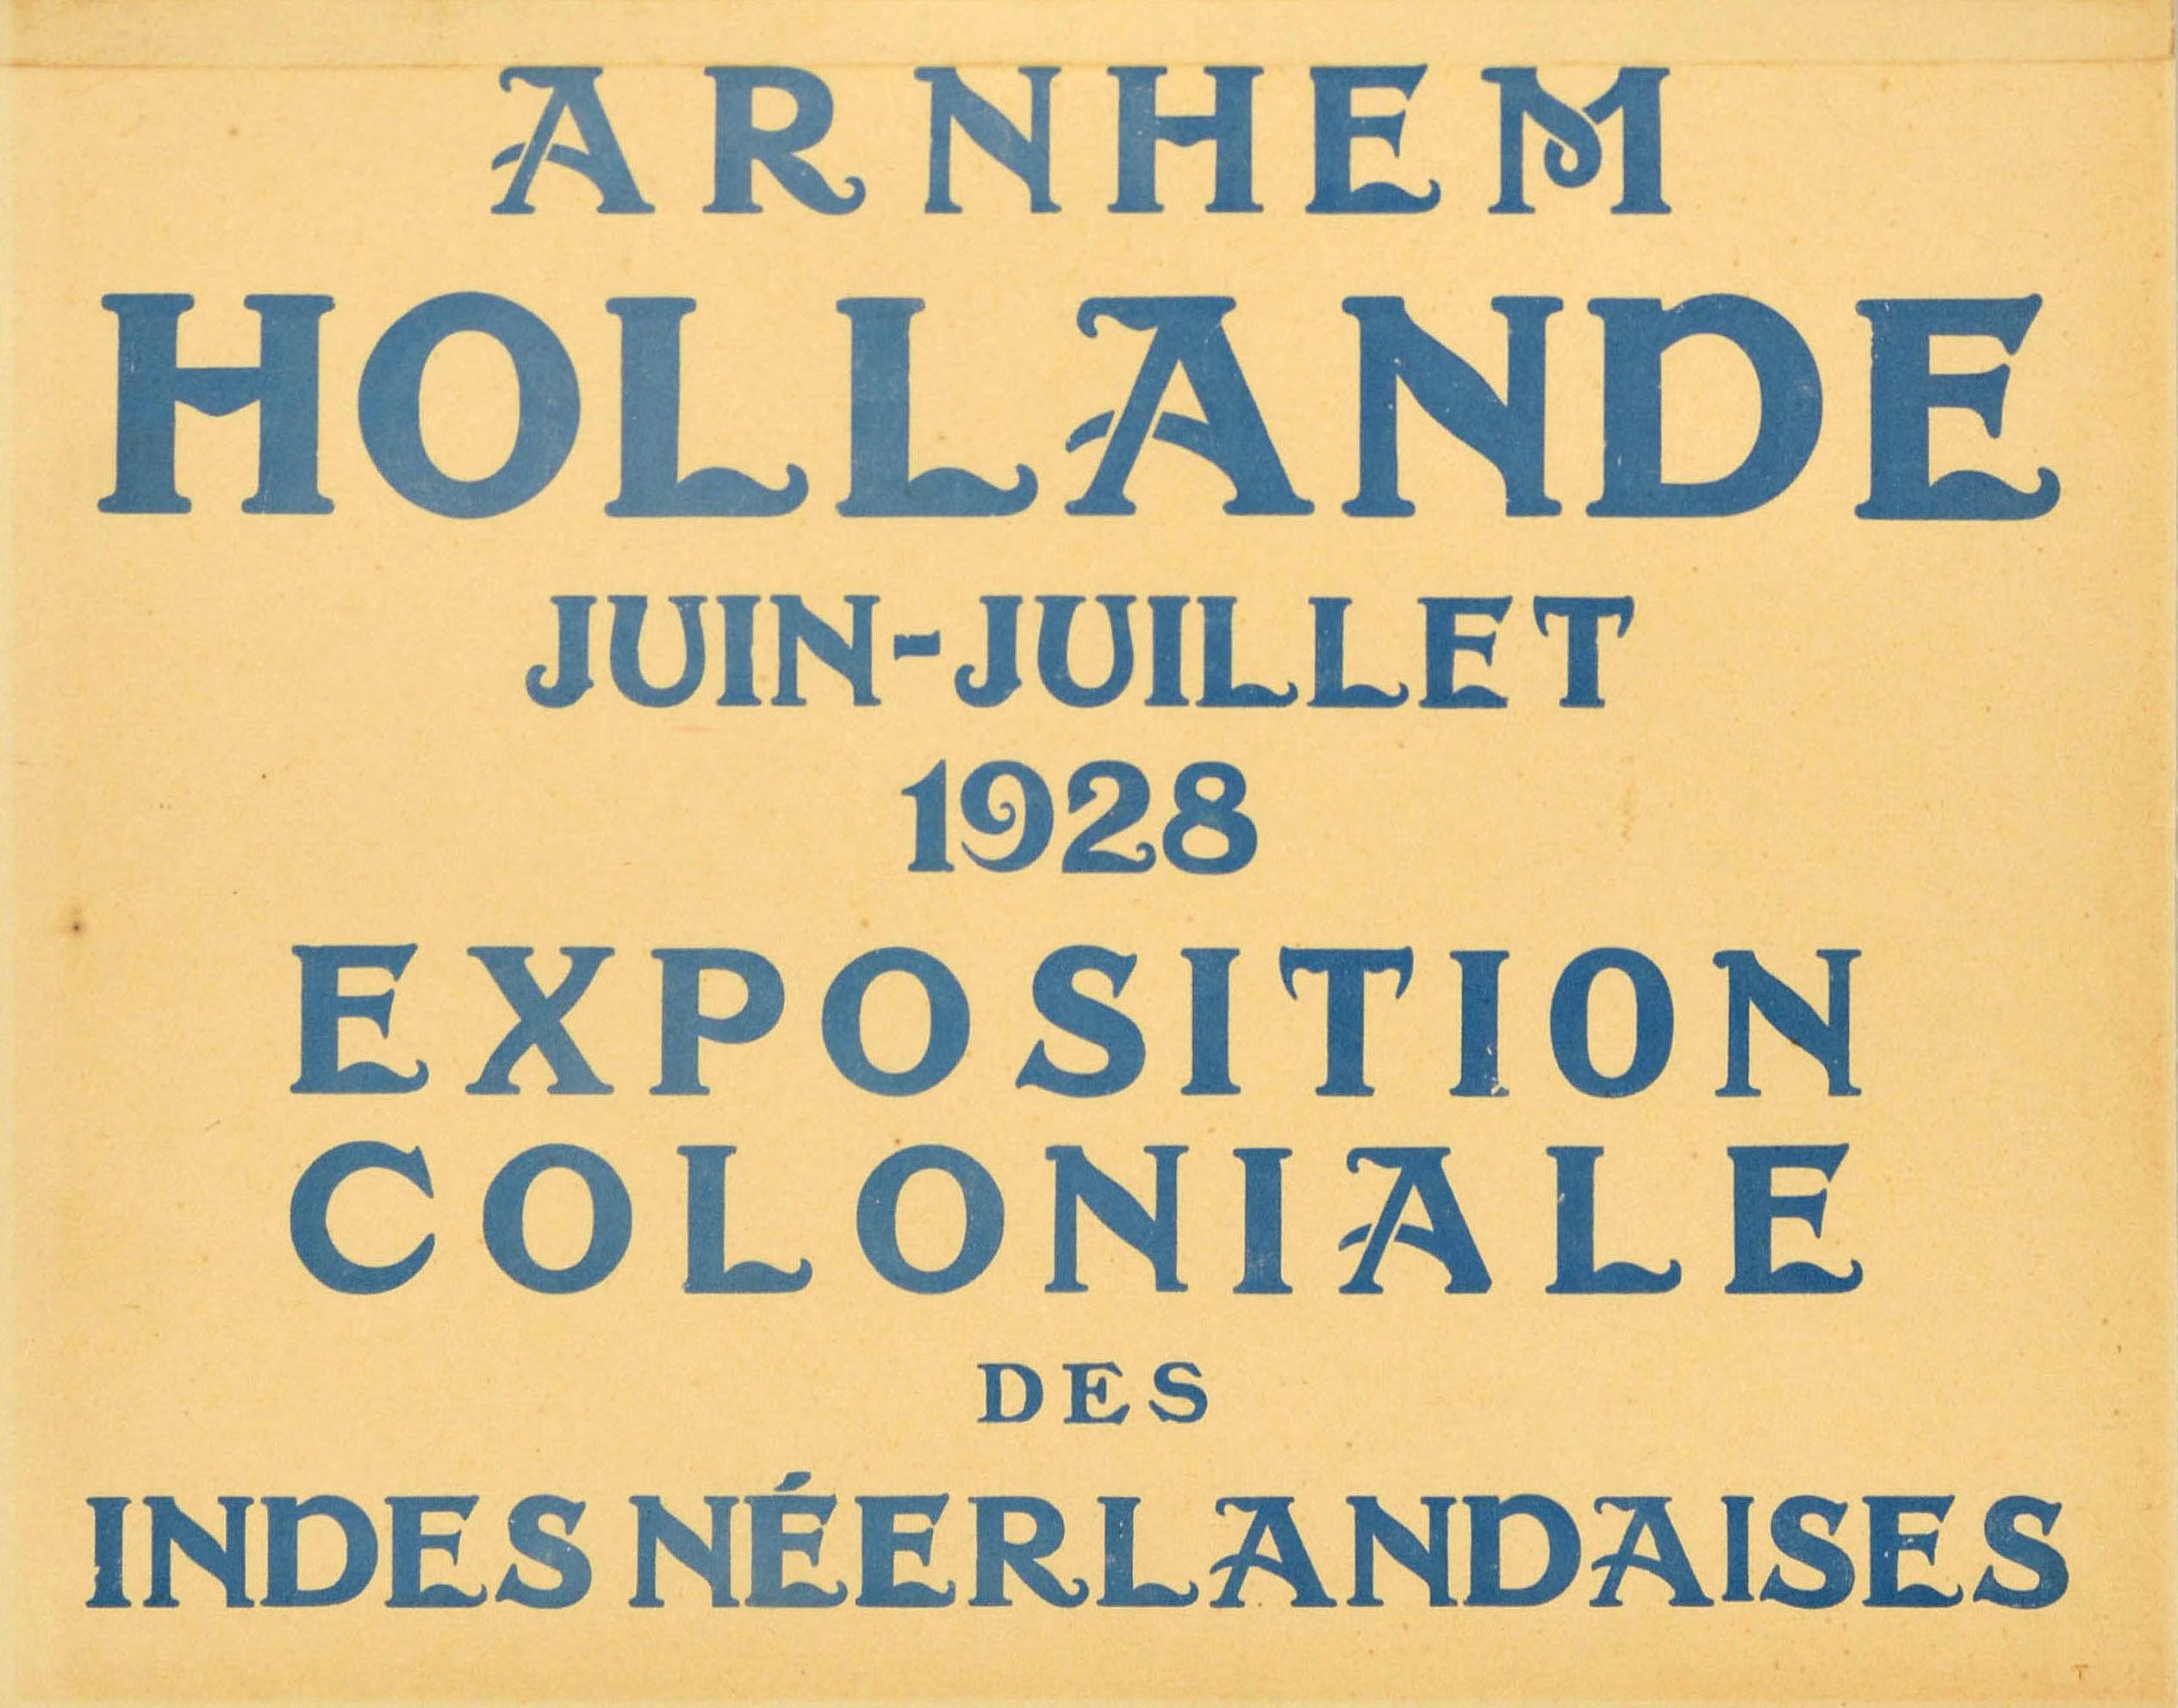 Original vintage advertising poster for the Dutch East Indies Colonial Exhibition / Exposition Coloniale des Indes Neerlandaises that took place in Arnhem Holland in June-July 1928. Great image of two people in traditional clothing and headdresses